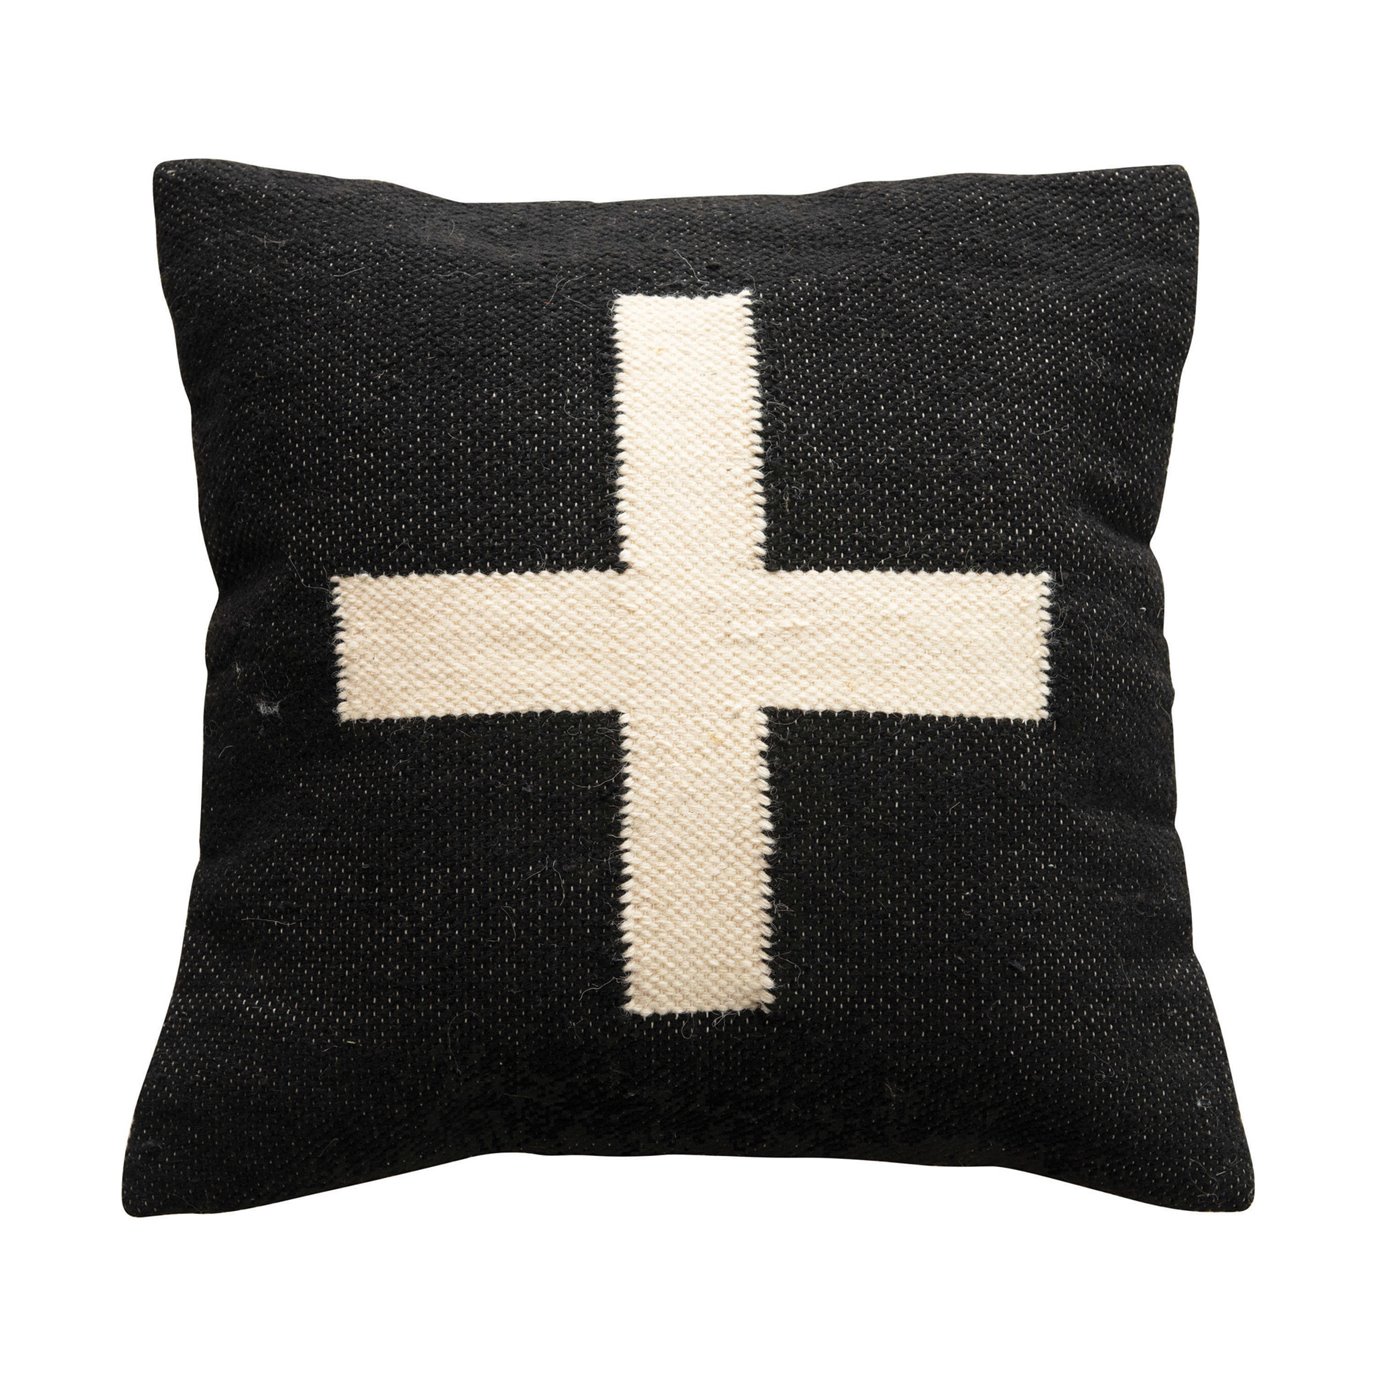 Wool Blend Pillow with Swiss Cross, Black & Cream Color